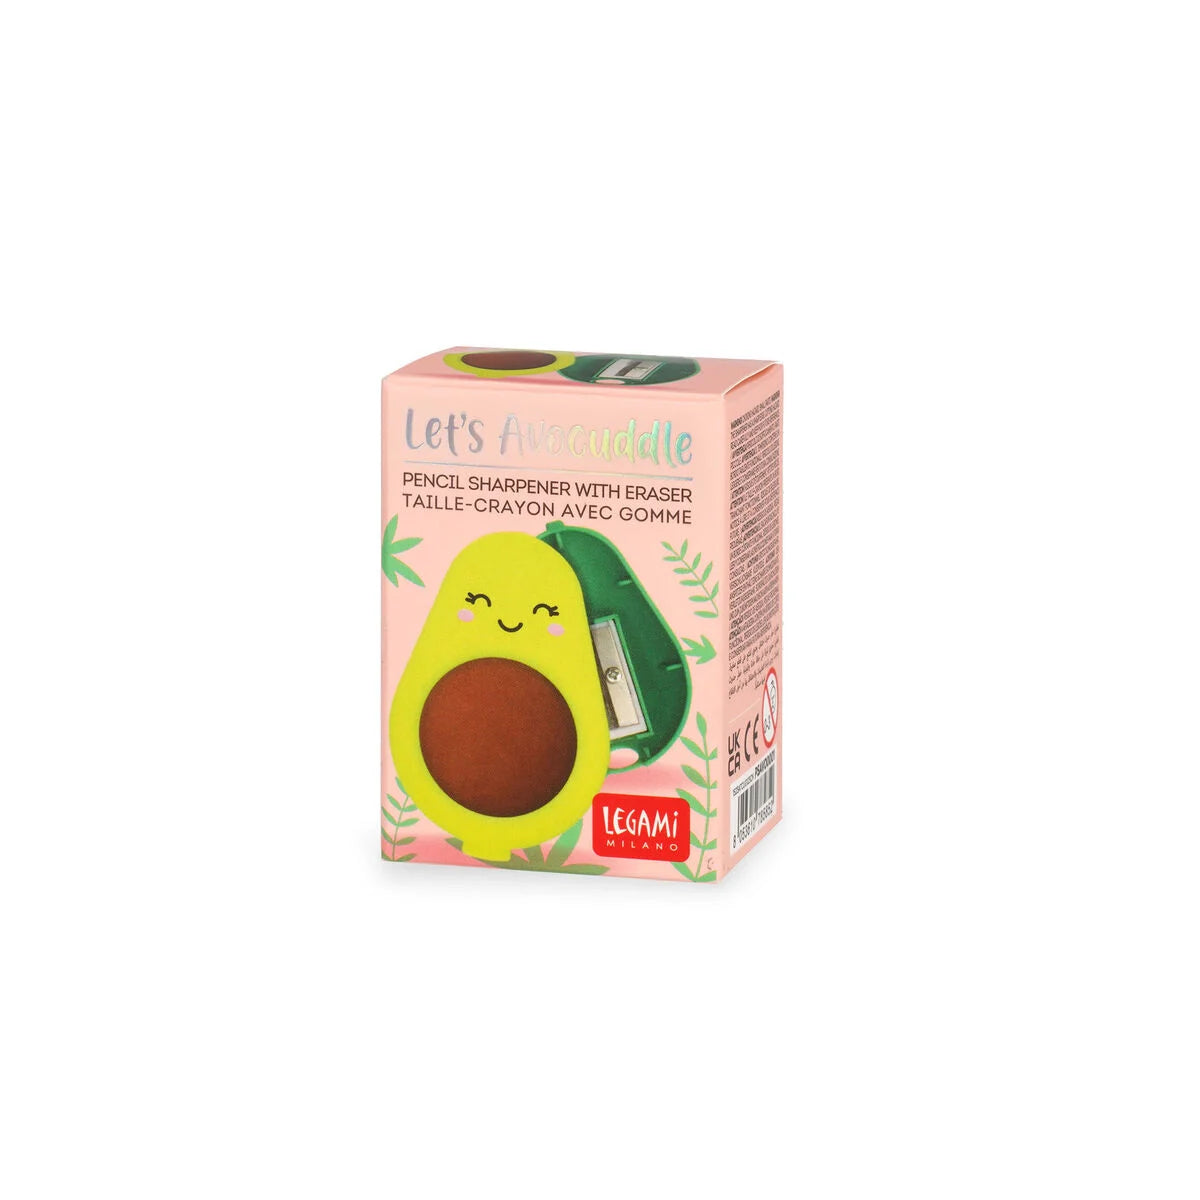 Back to School | Legami Pencil Sharpener With Eraser Avocado by Weirs of Baggot Street